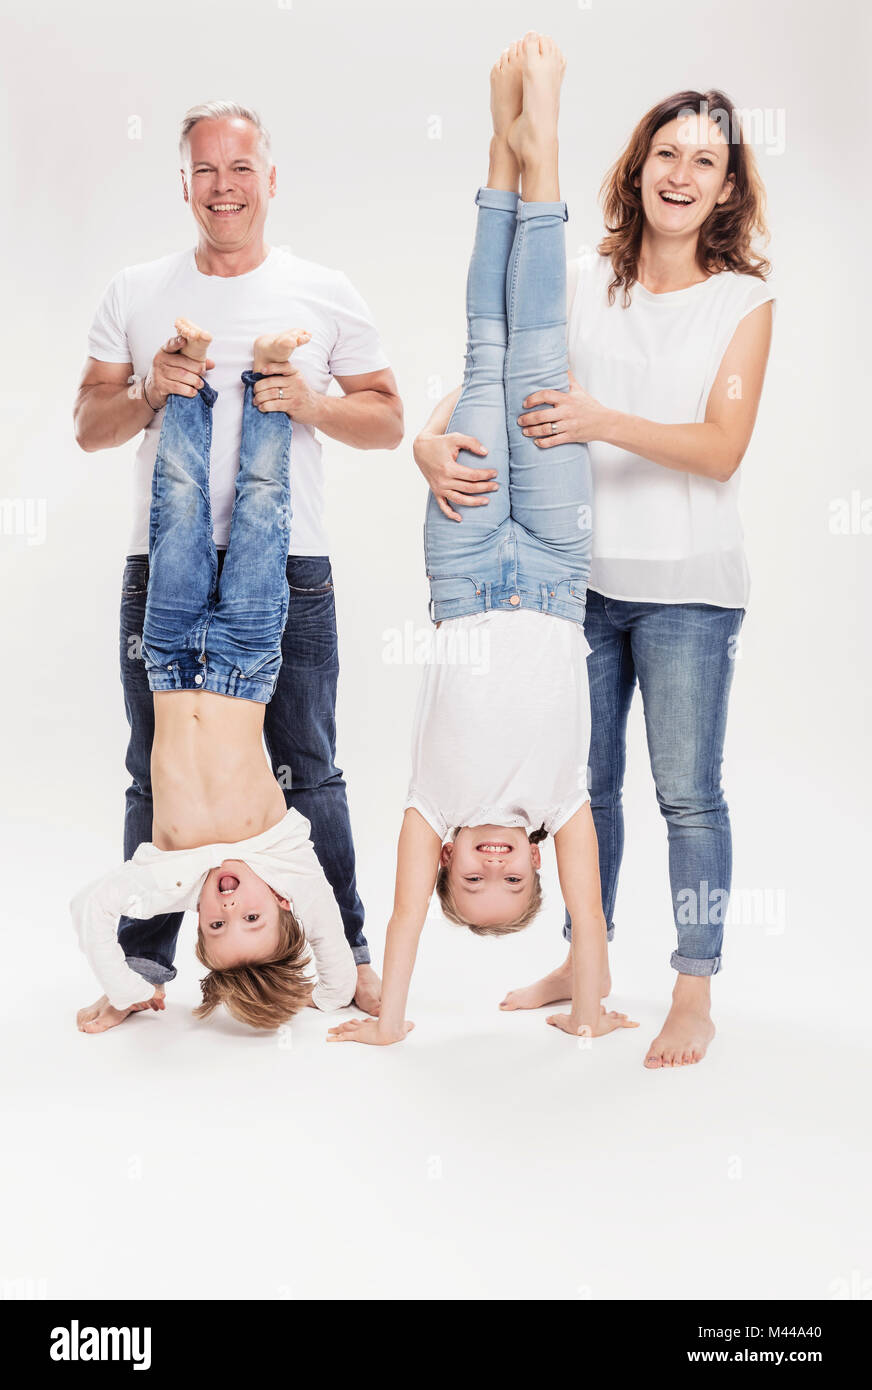 Family portrait with children held upside down Stock Photo